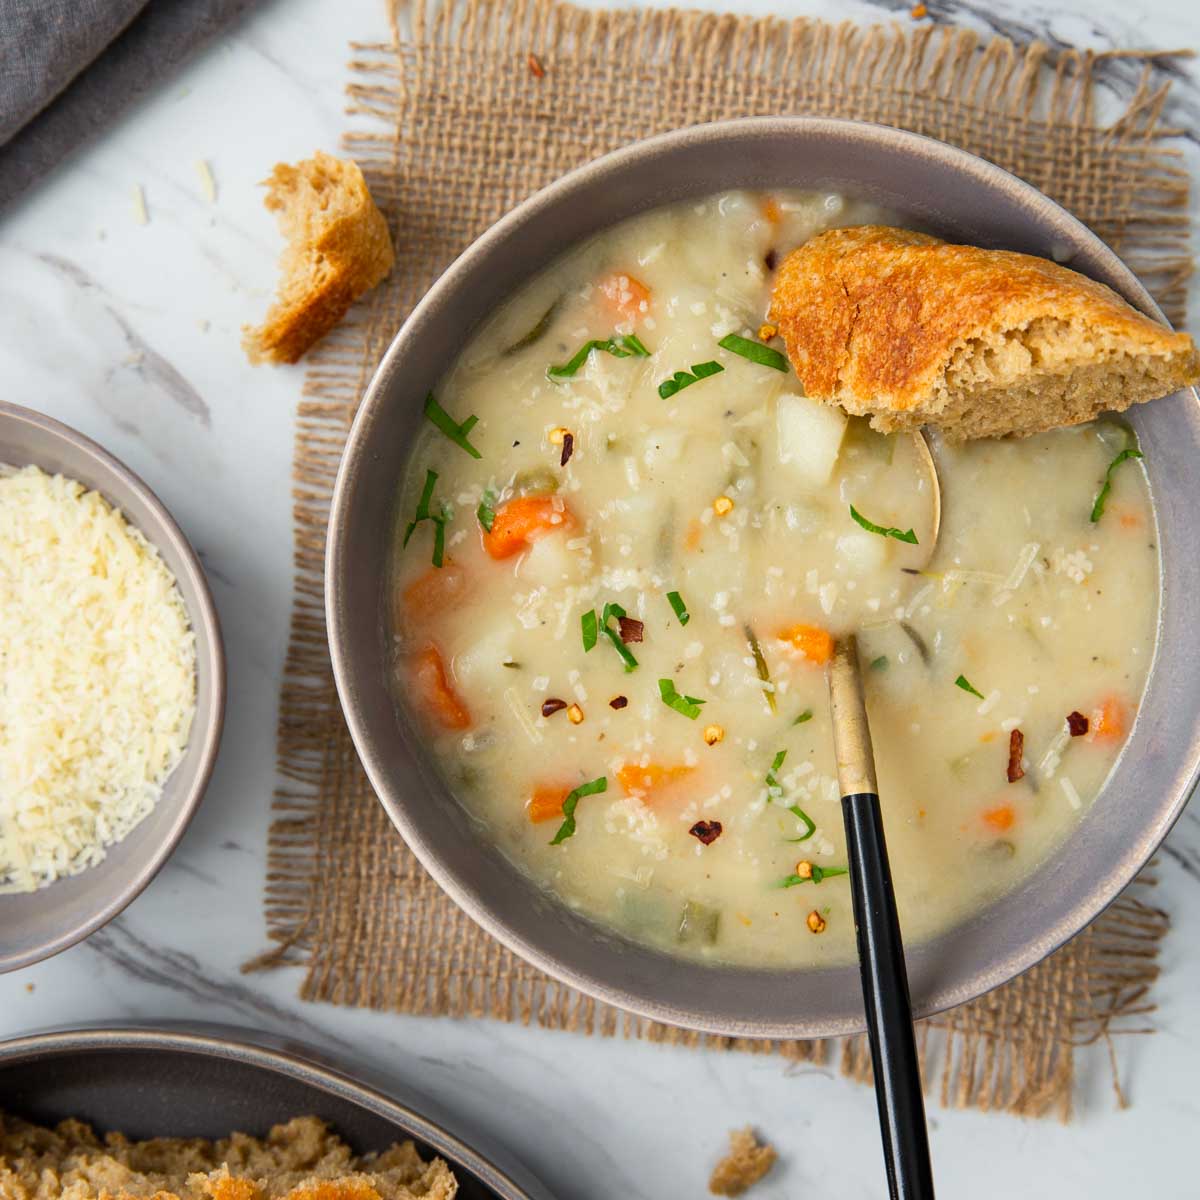 Creamy healthy potato soup with a piece of bread in a serving bowl.